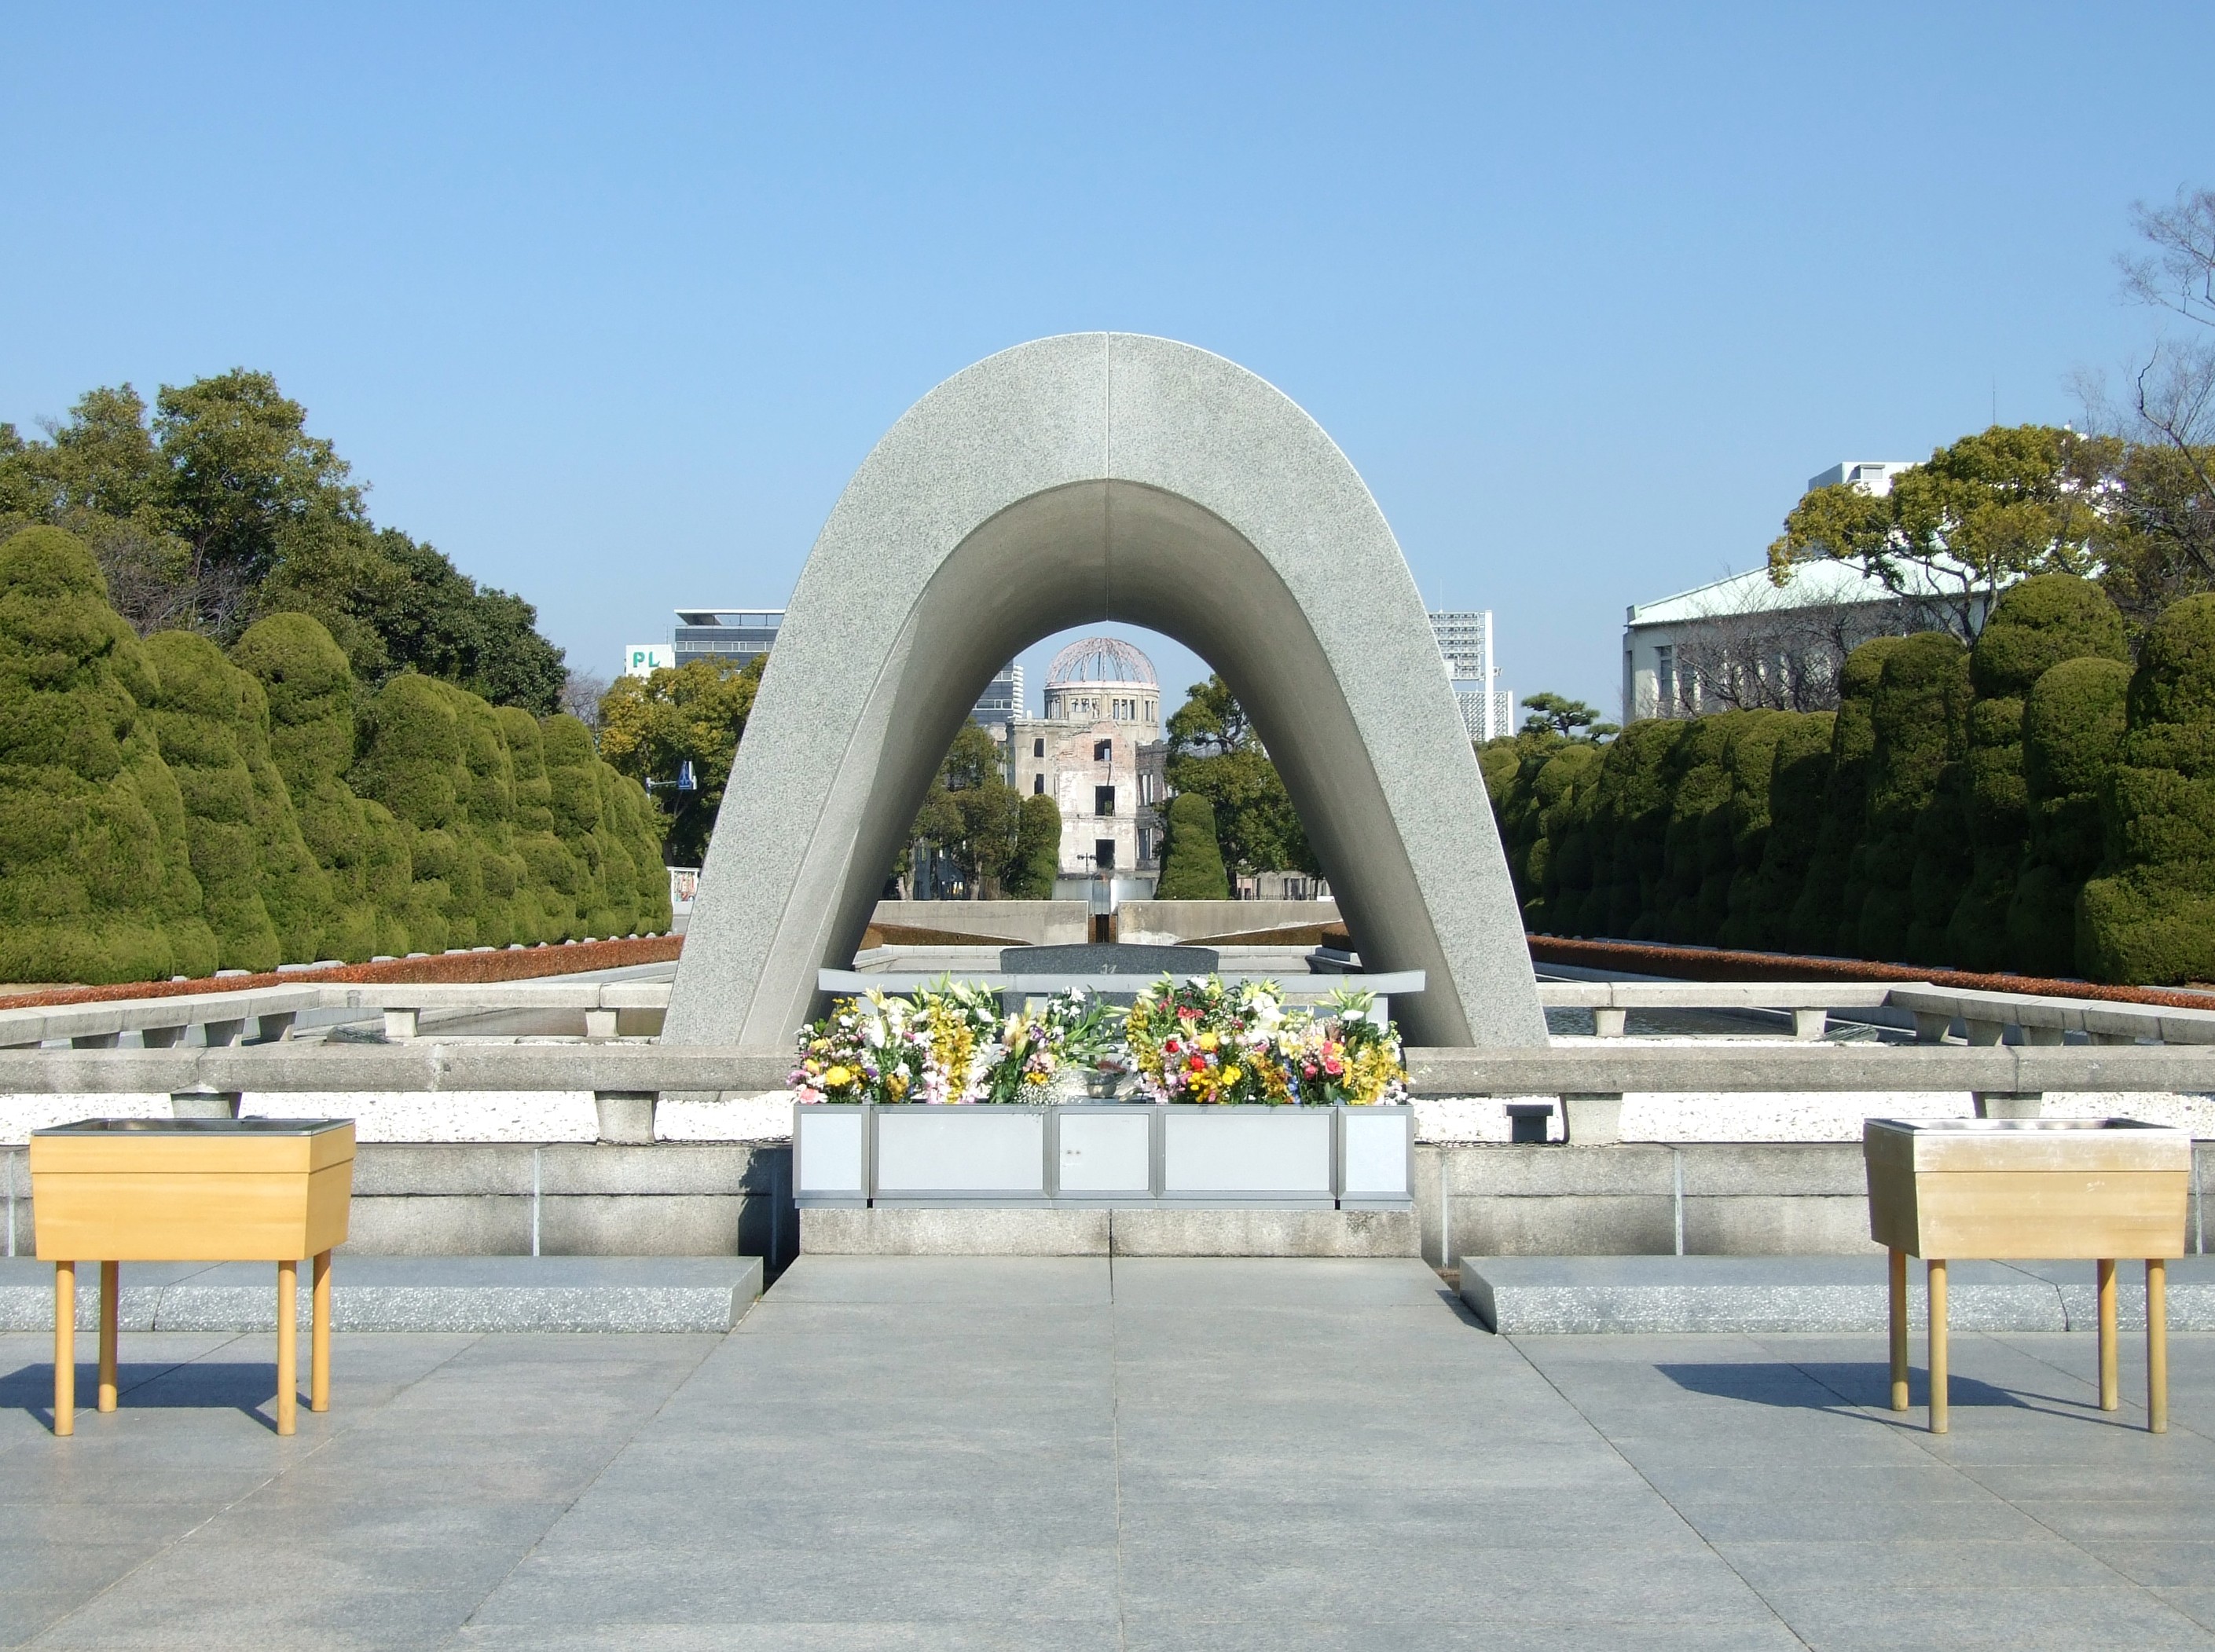 Peace Memorial Park, built with a wish for world peace